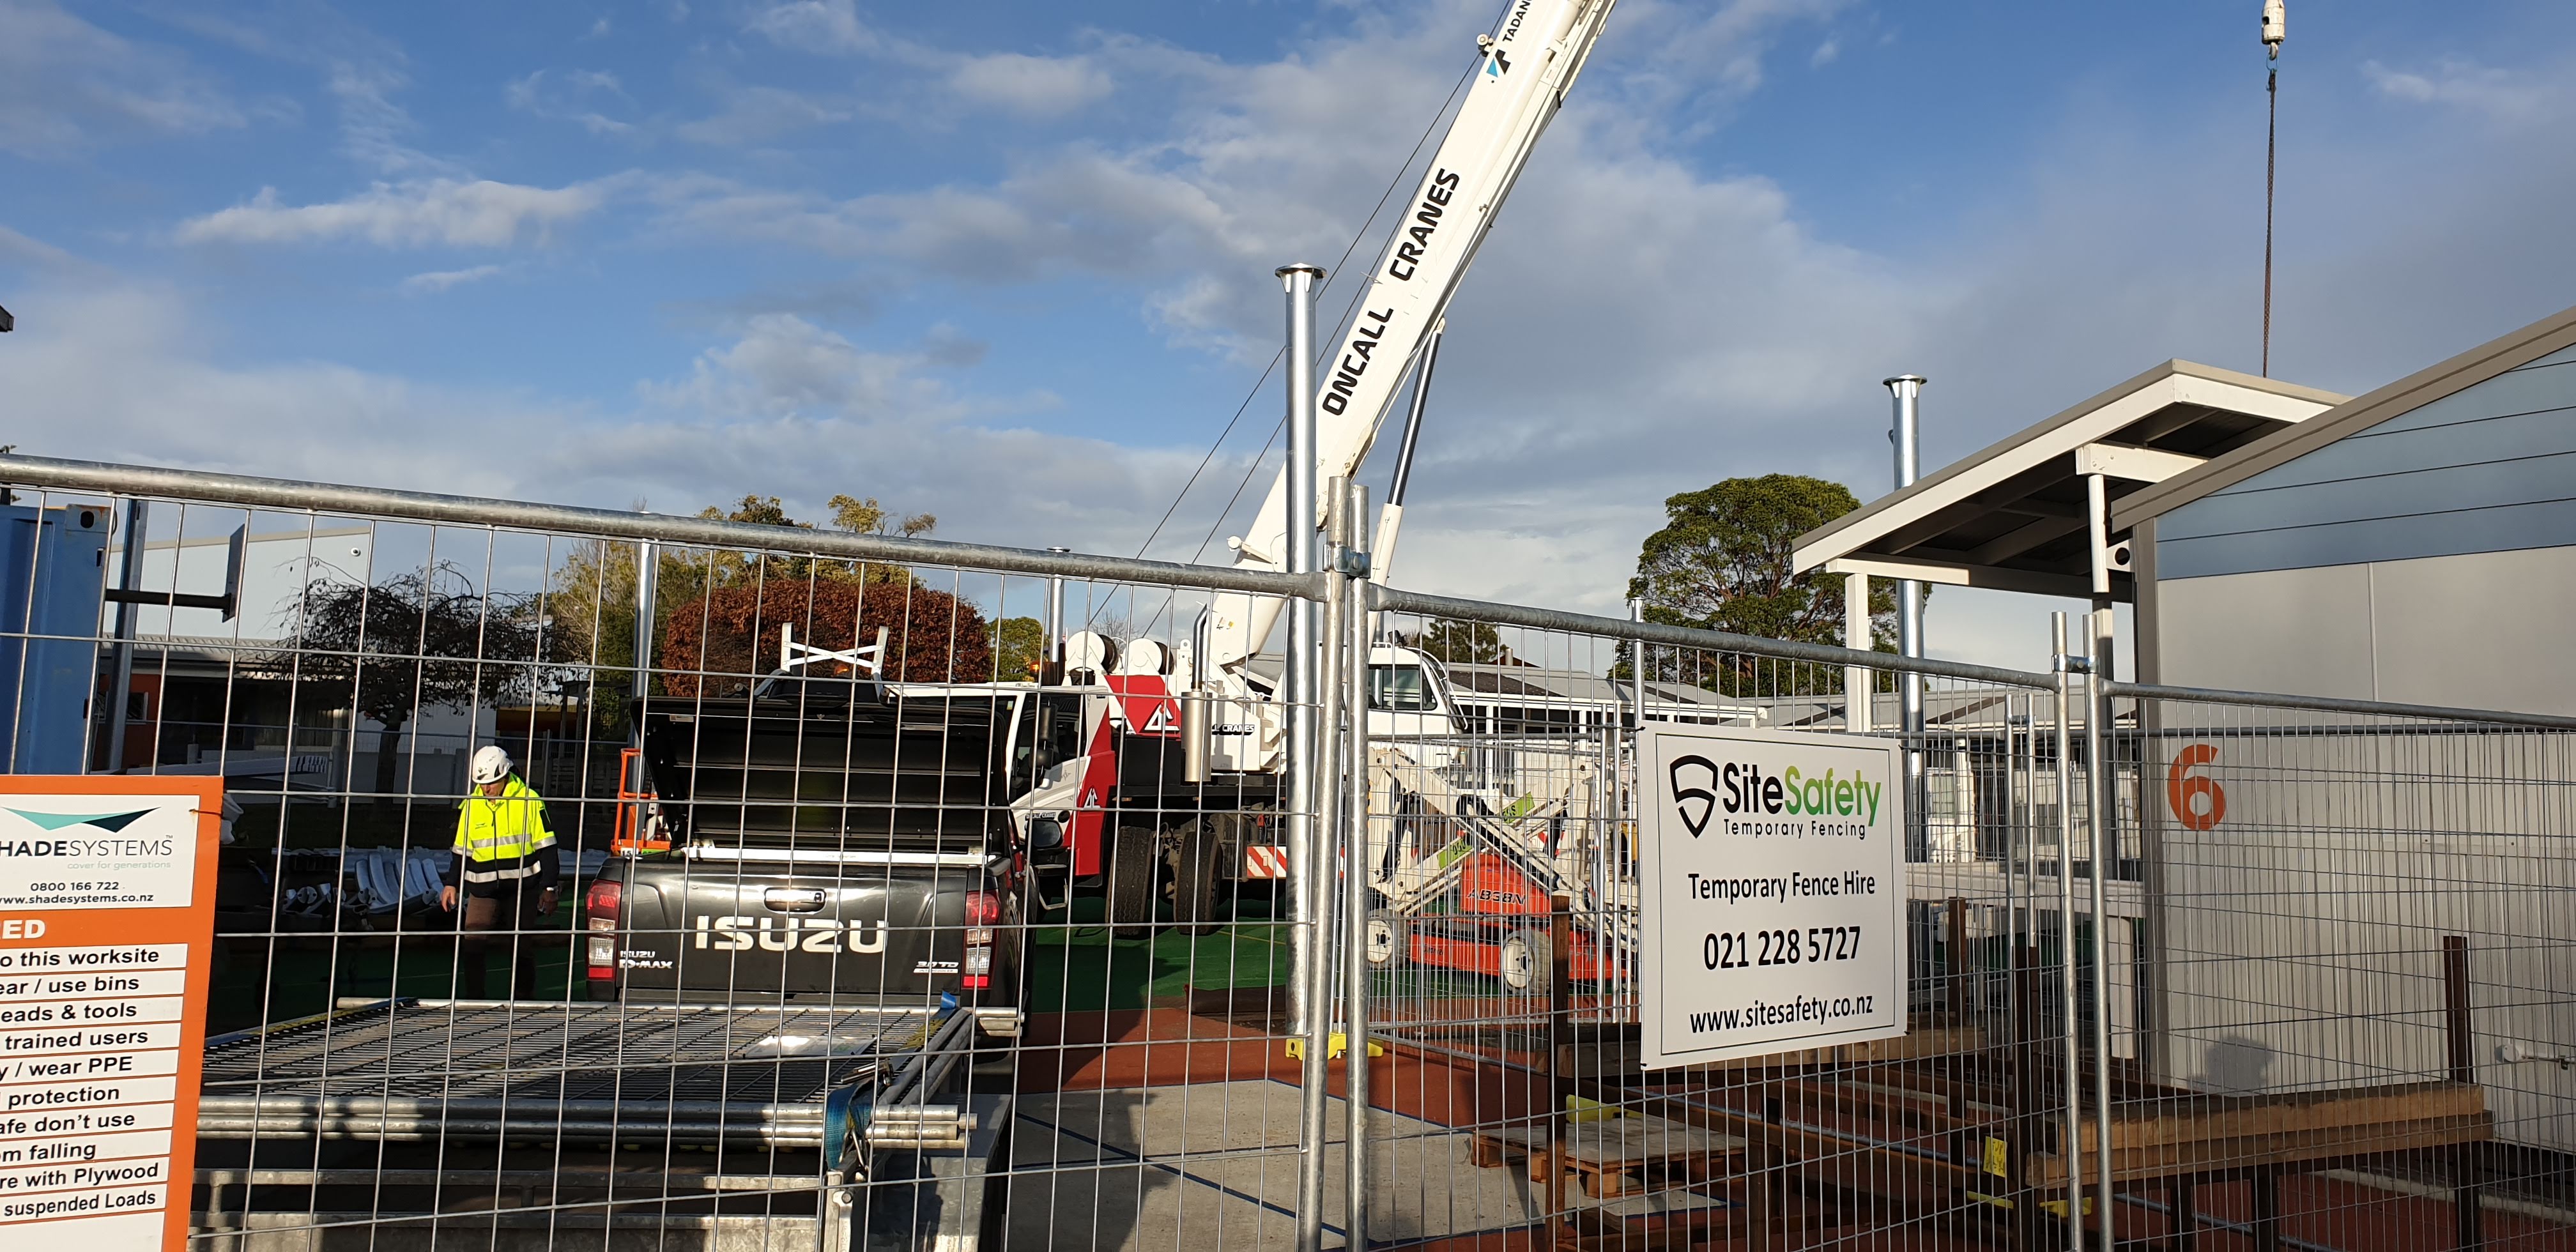 Temporary fence hire Auckland